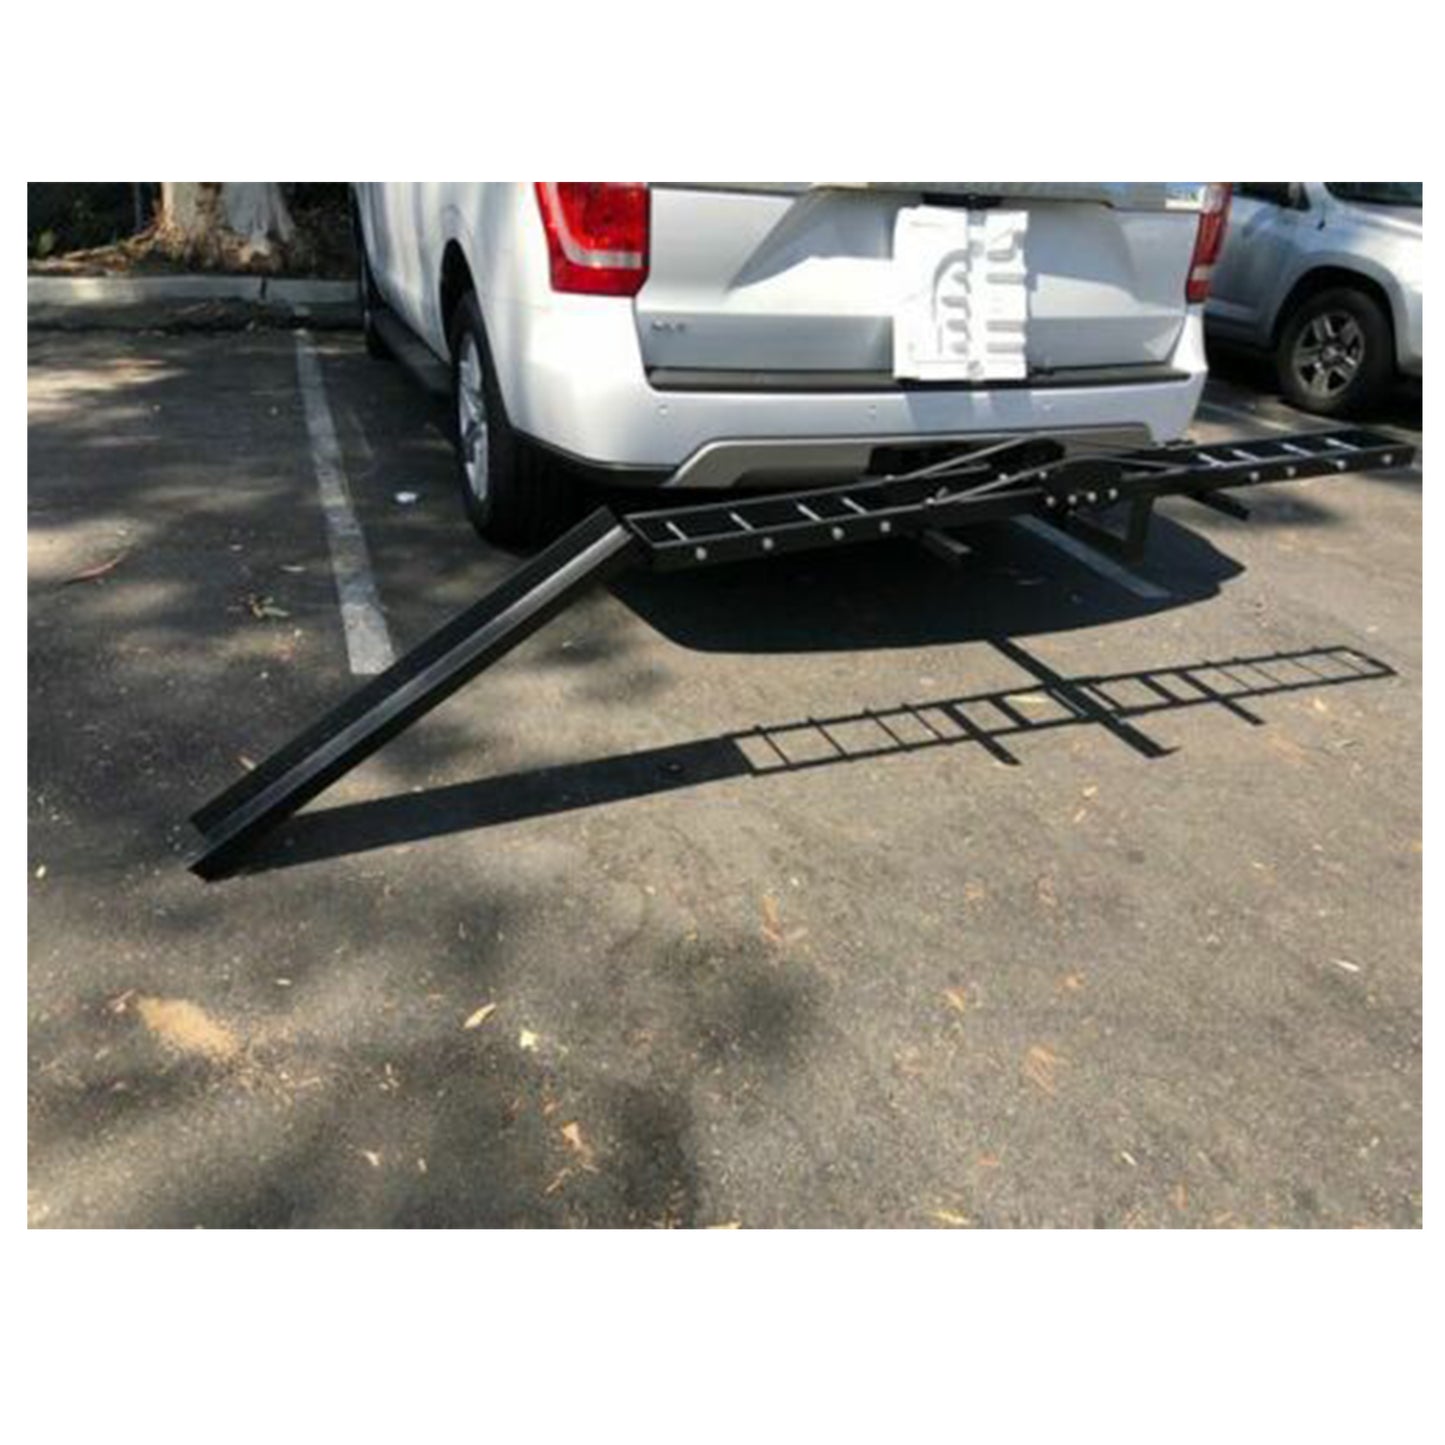 500lbs Motorcycle Hitch Carrier Steel Rack With Ramp